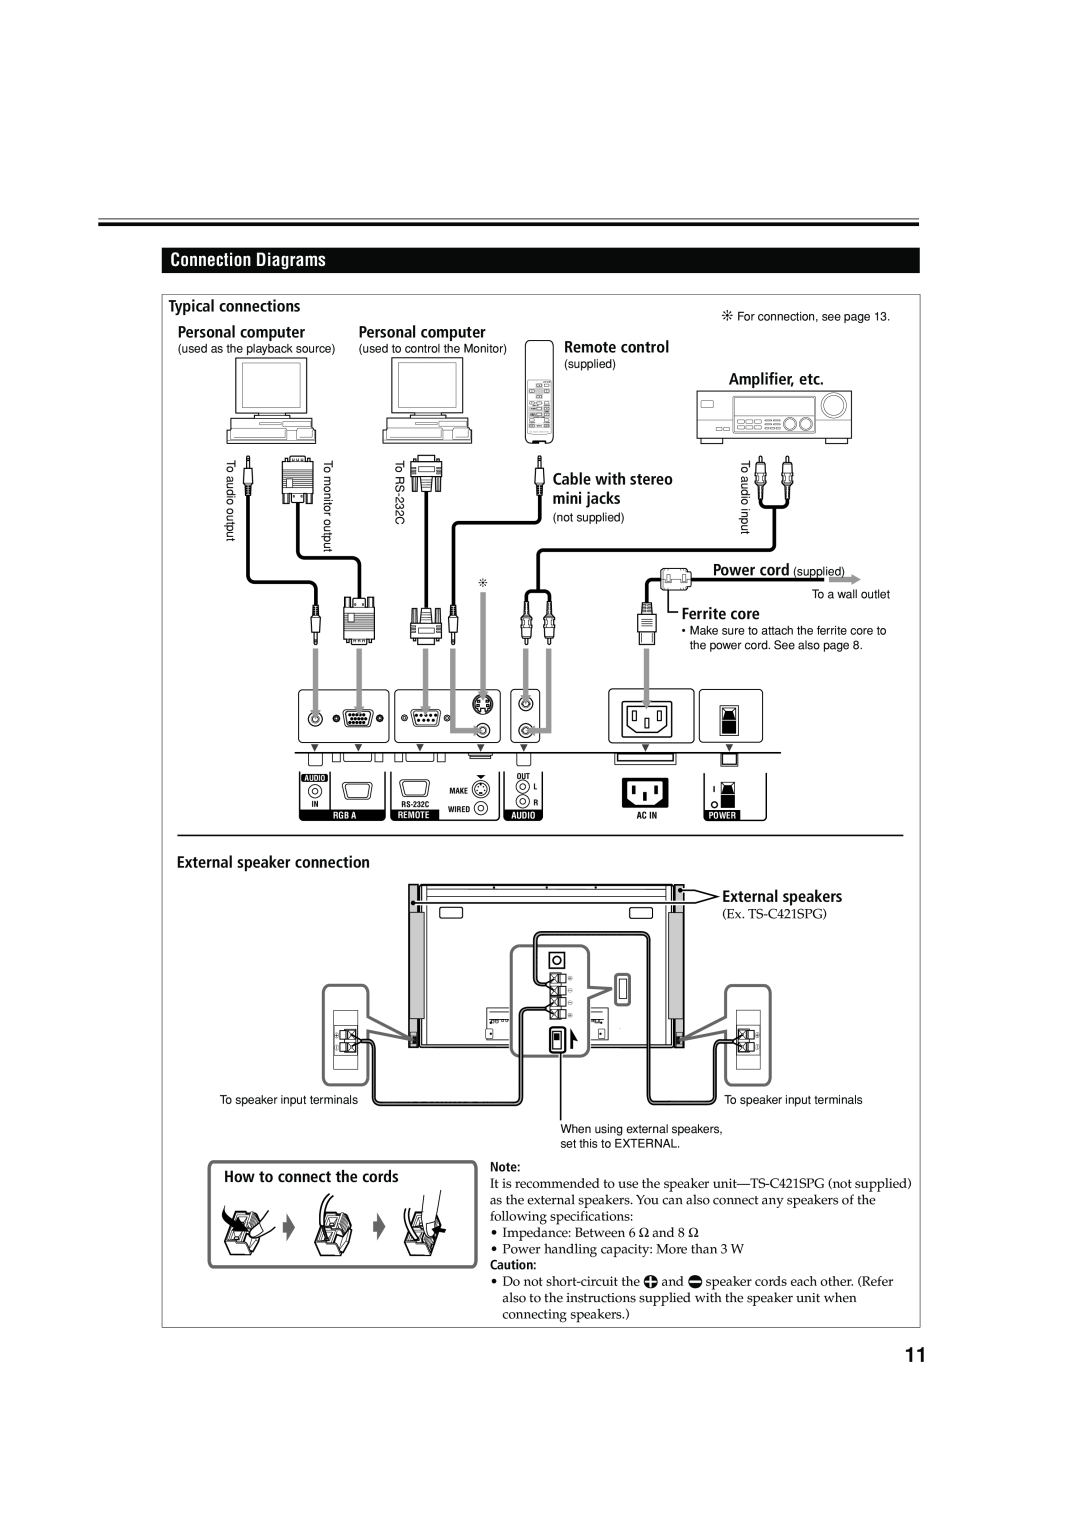 JVC LCT1616-001A, GM-V42C Connection Diagrams, Typical connections, Personal computer, Amplifier, etc, Cable with stereo 